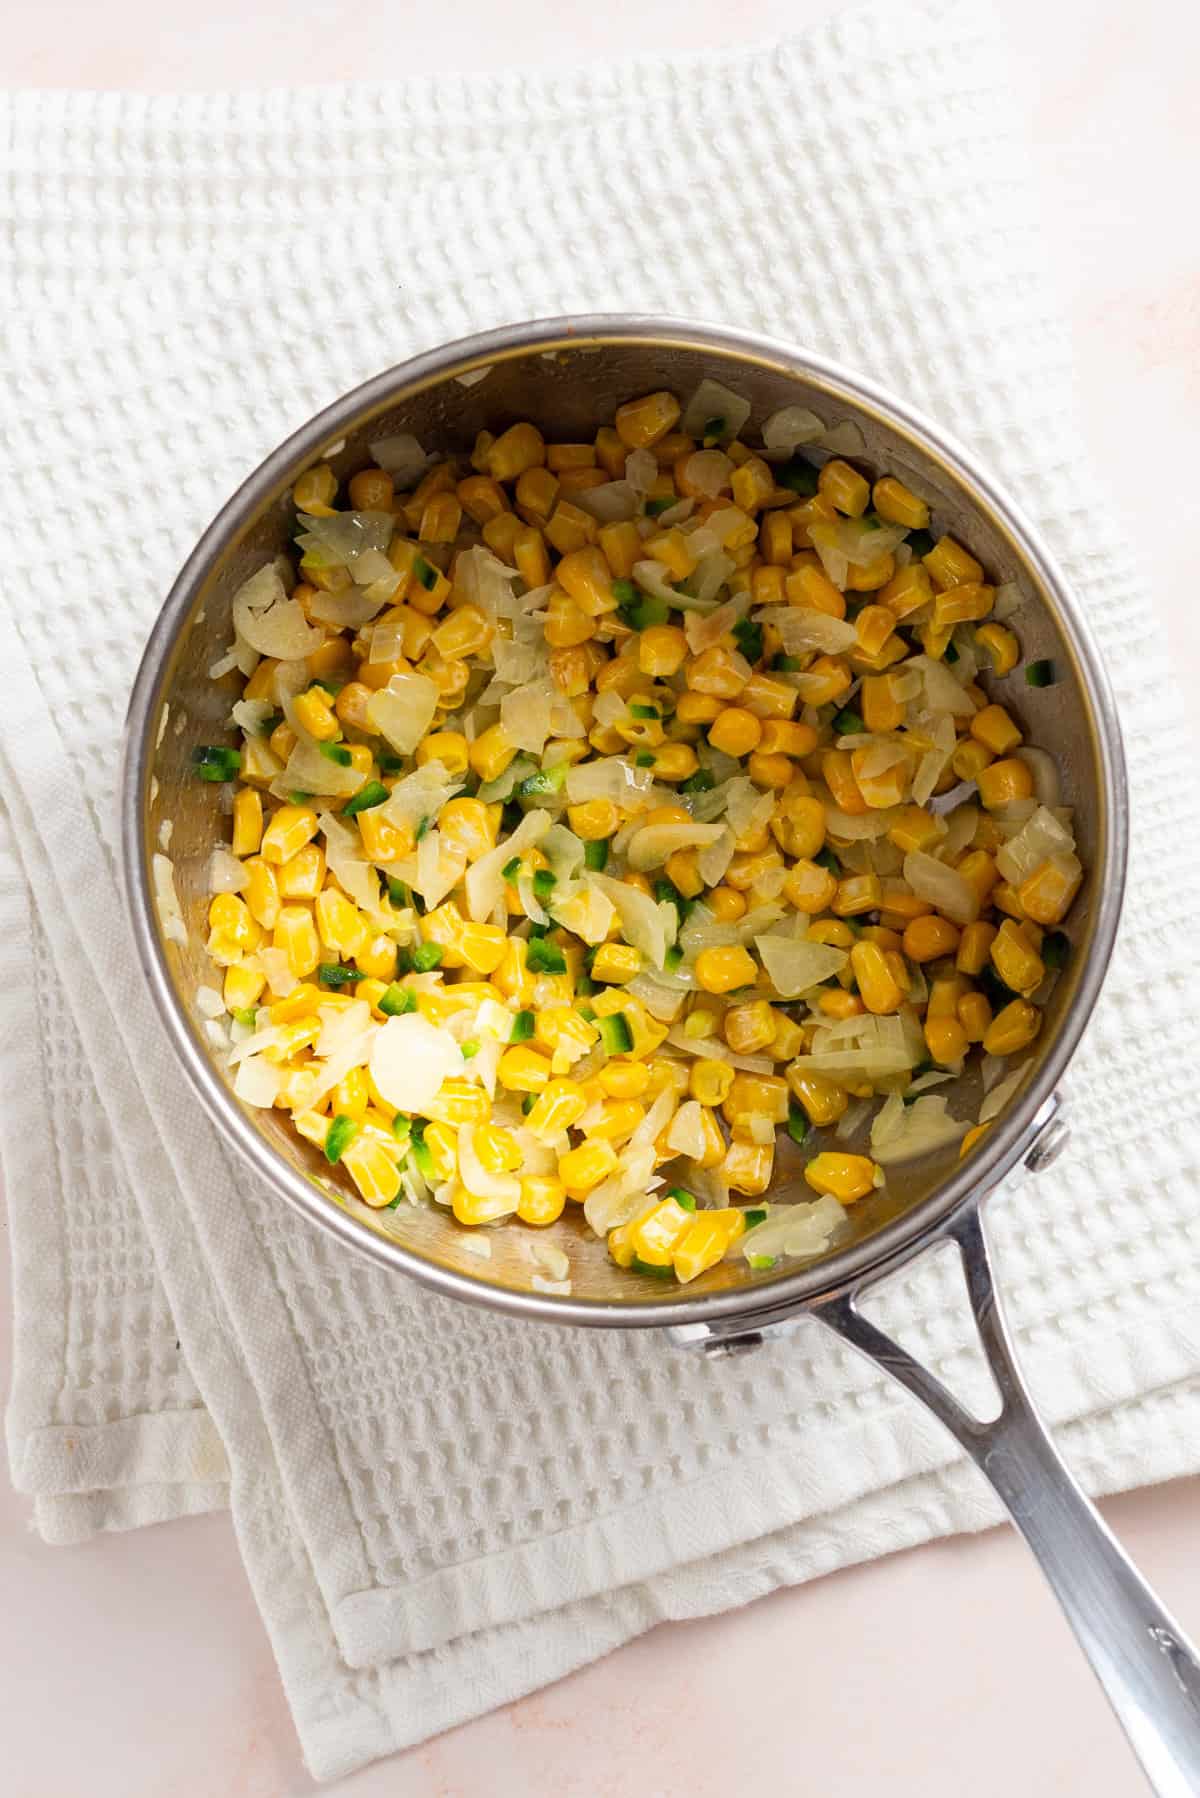 An overhead image of corn kernels added to the saucepan.